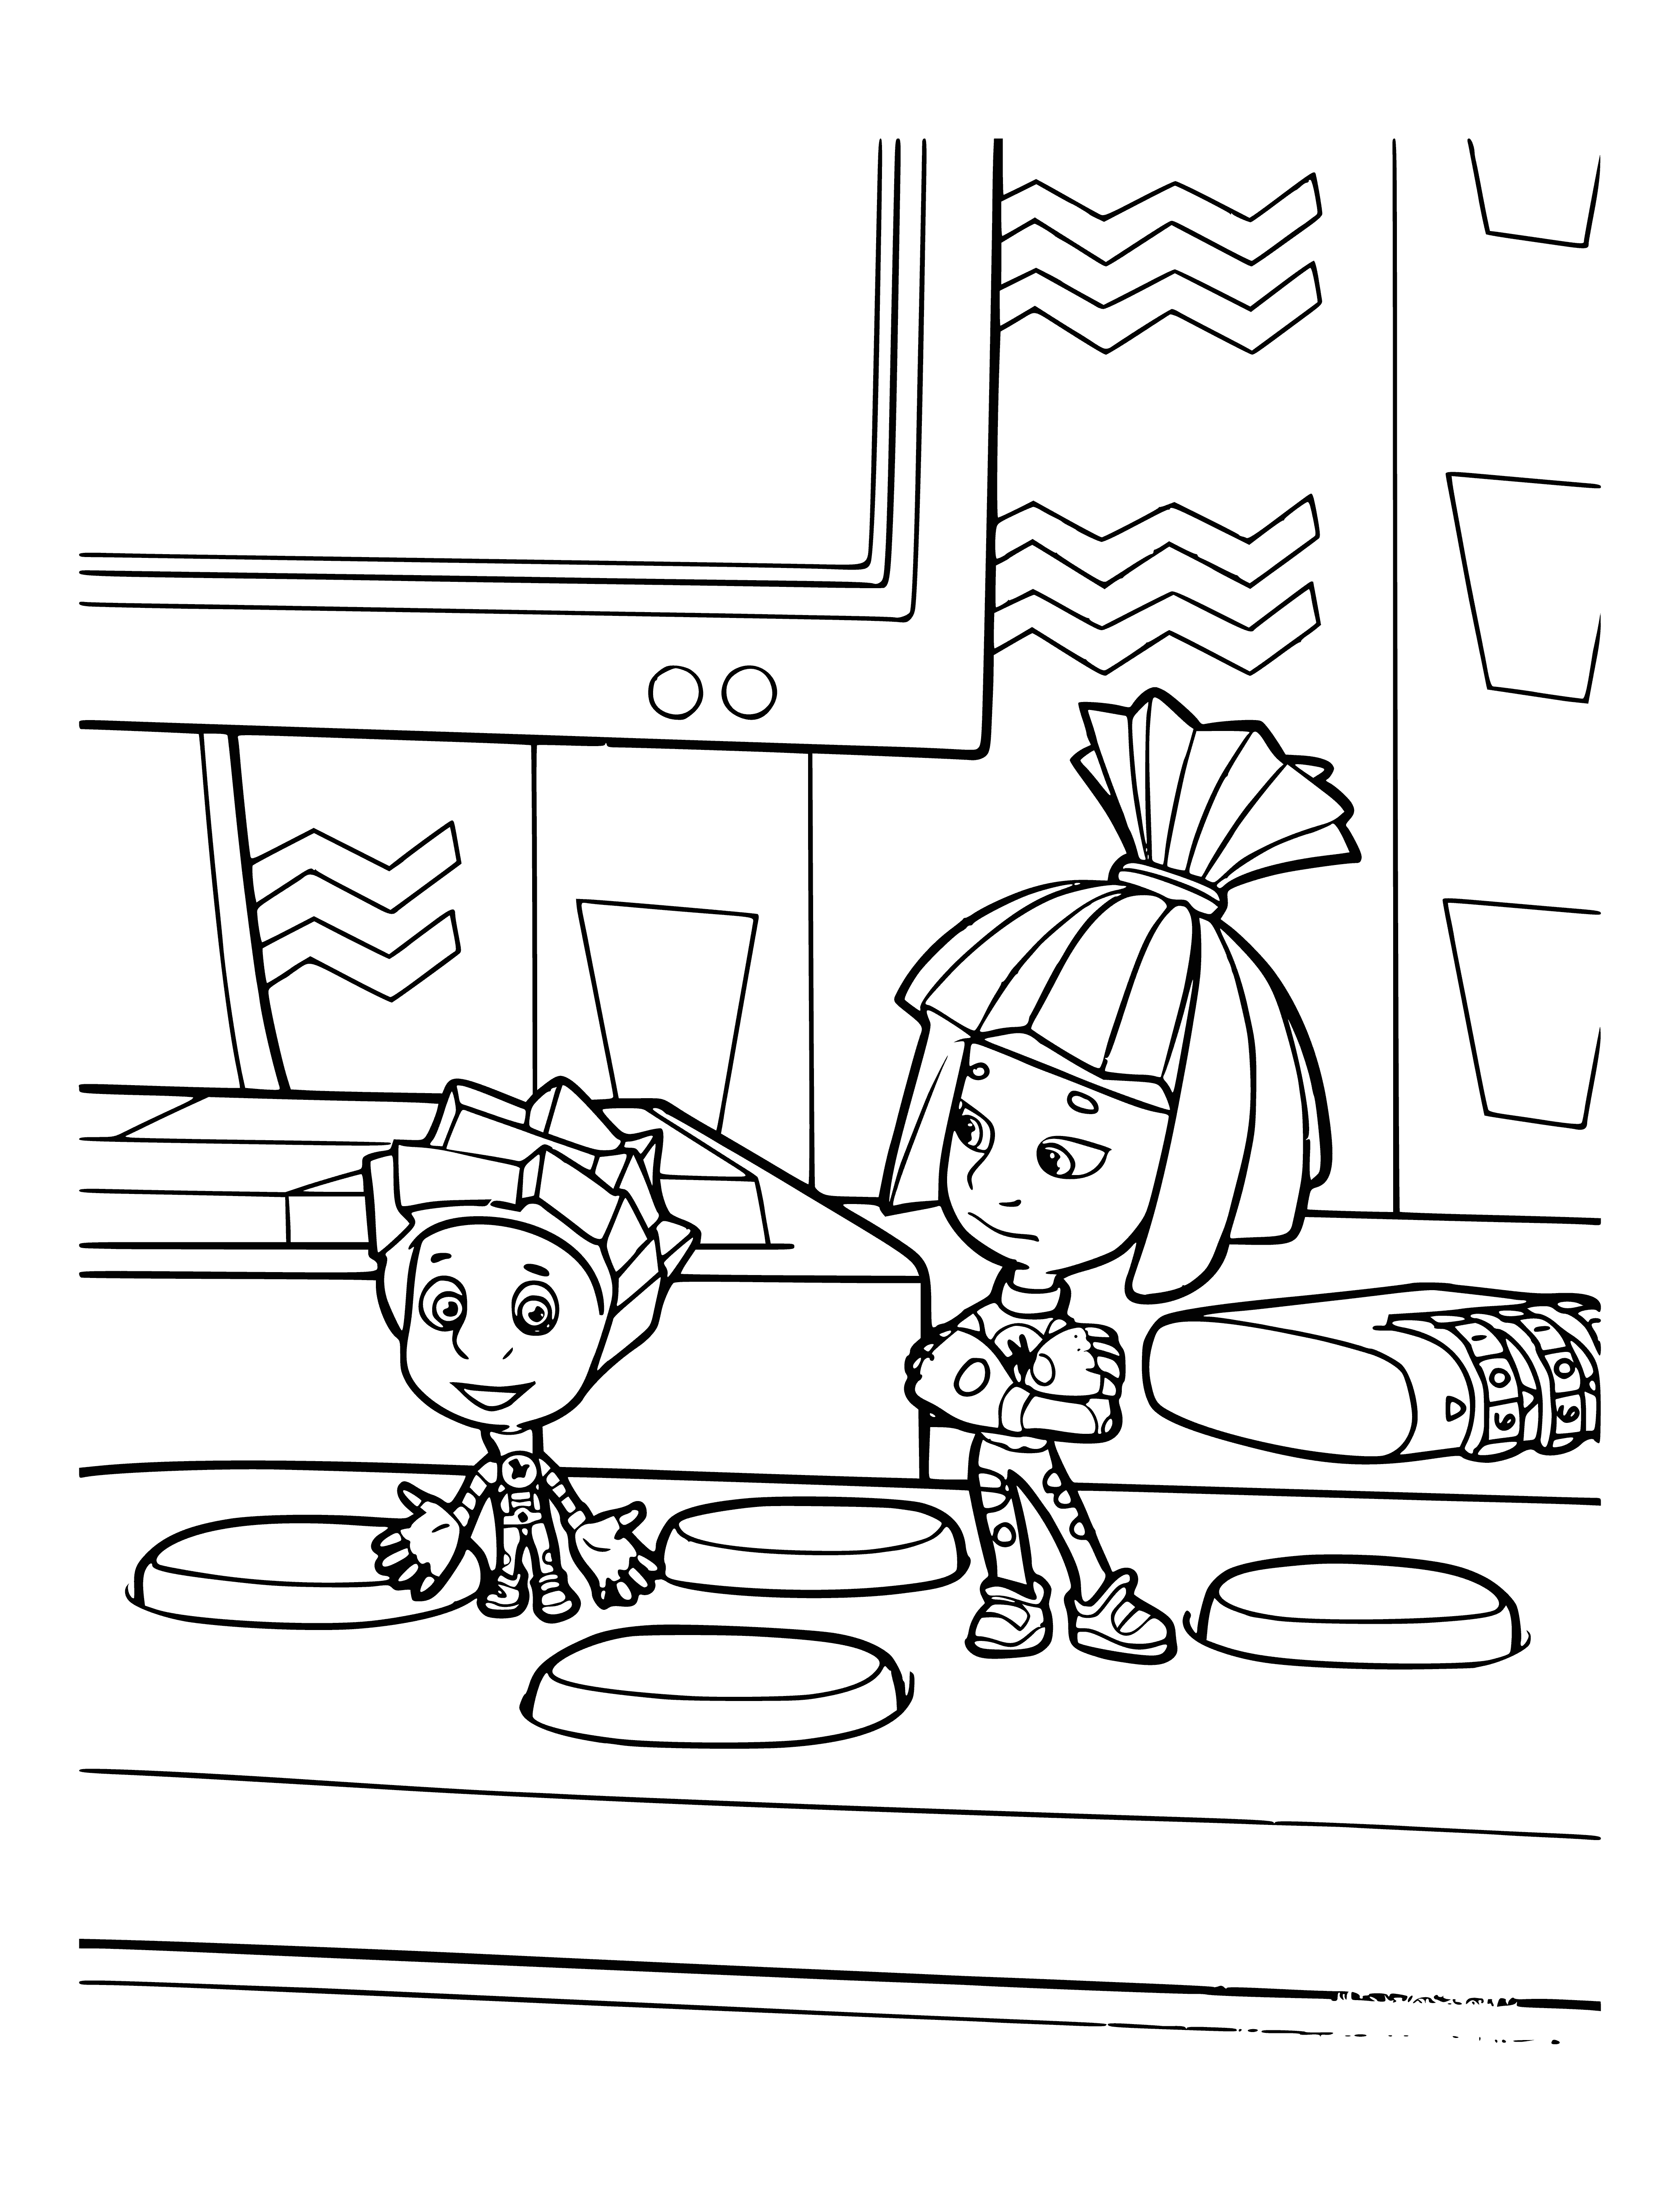 coloring page: Two fixies: boy & girl, black hair & clothes with white stripes, white shoes; before a white background.